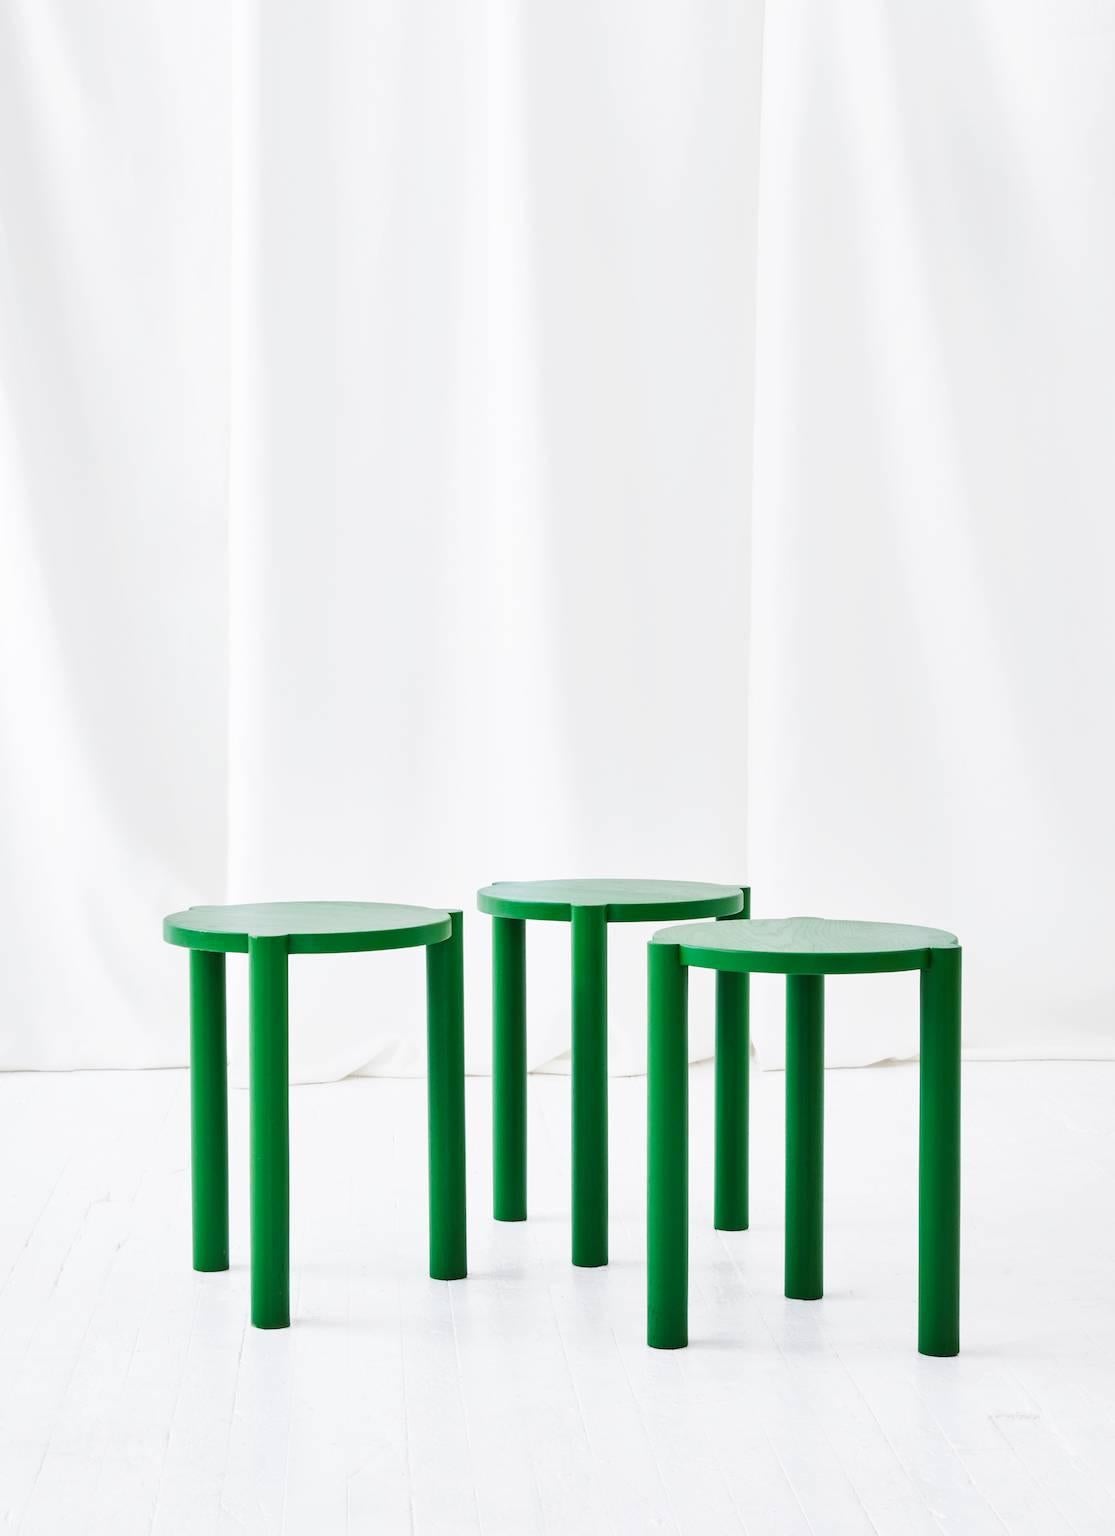 The WC3 stool by ASH NYC is a playful stool. The hand-turned legs join seamlessly with the seat to create an elegant, handcrafted joint that defies gravity. 
 
An exercise in Minimalist design, the hidden joints allow for the stool to function